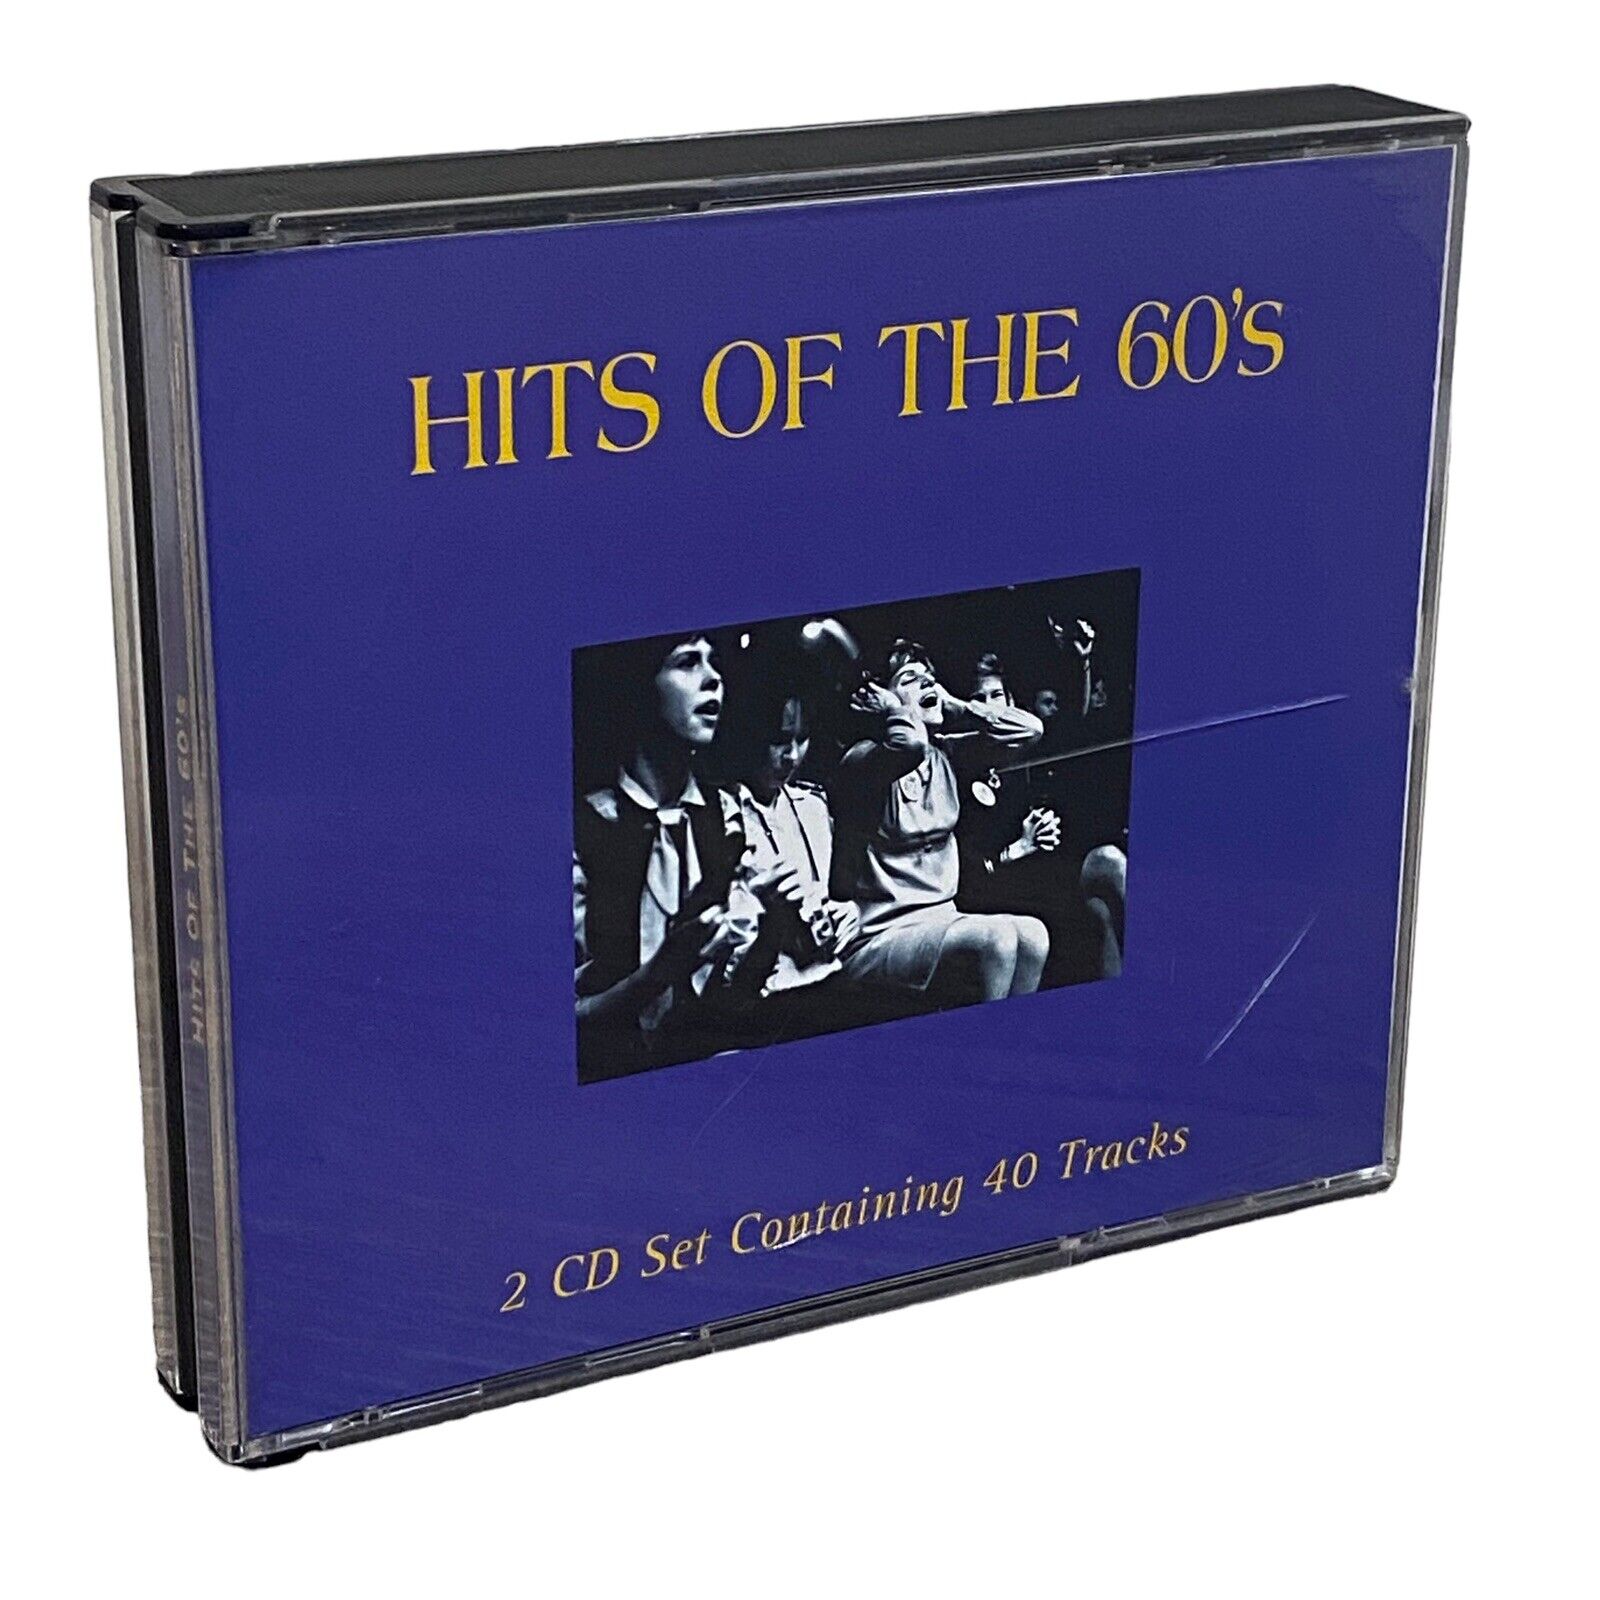 Hits Of The 60s 2 CD Set Compilation 2002 UK Import Delta Blue